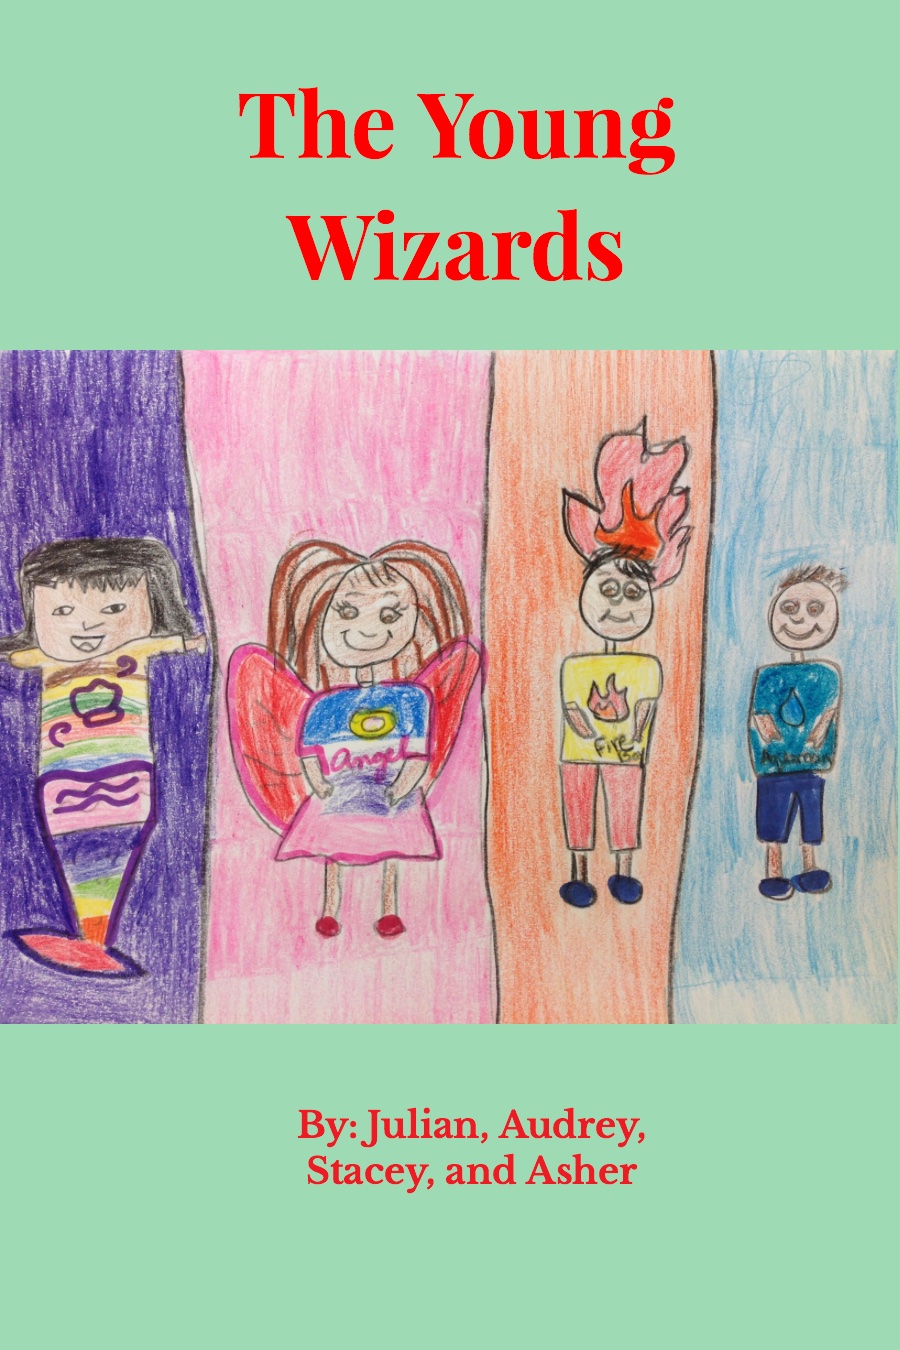 The Young Wizards by Tustin – July 3 – 1st Grade